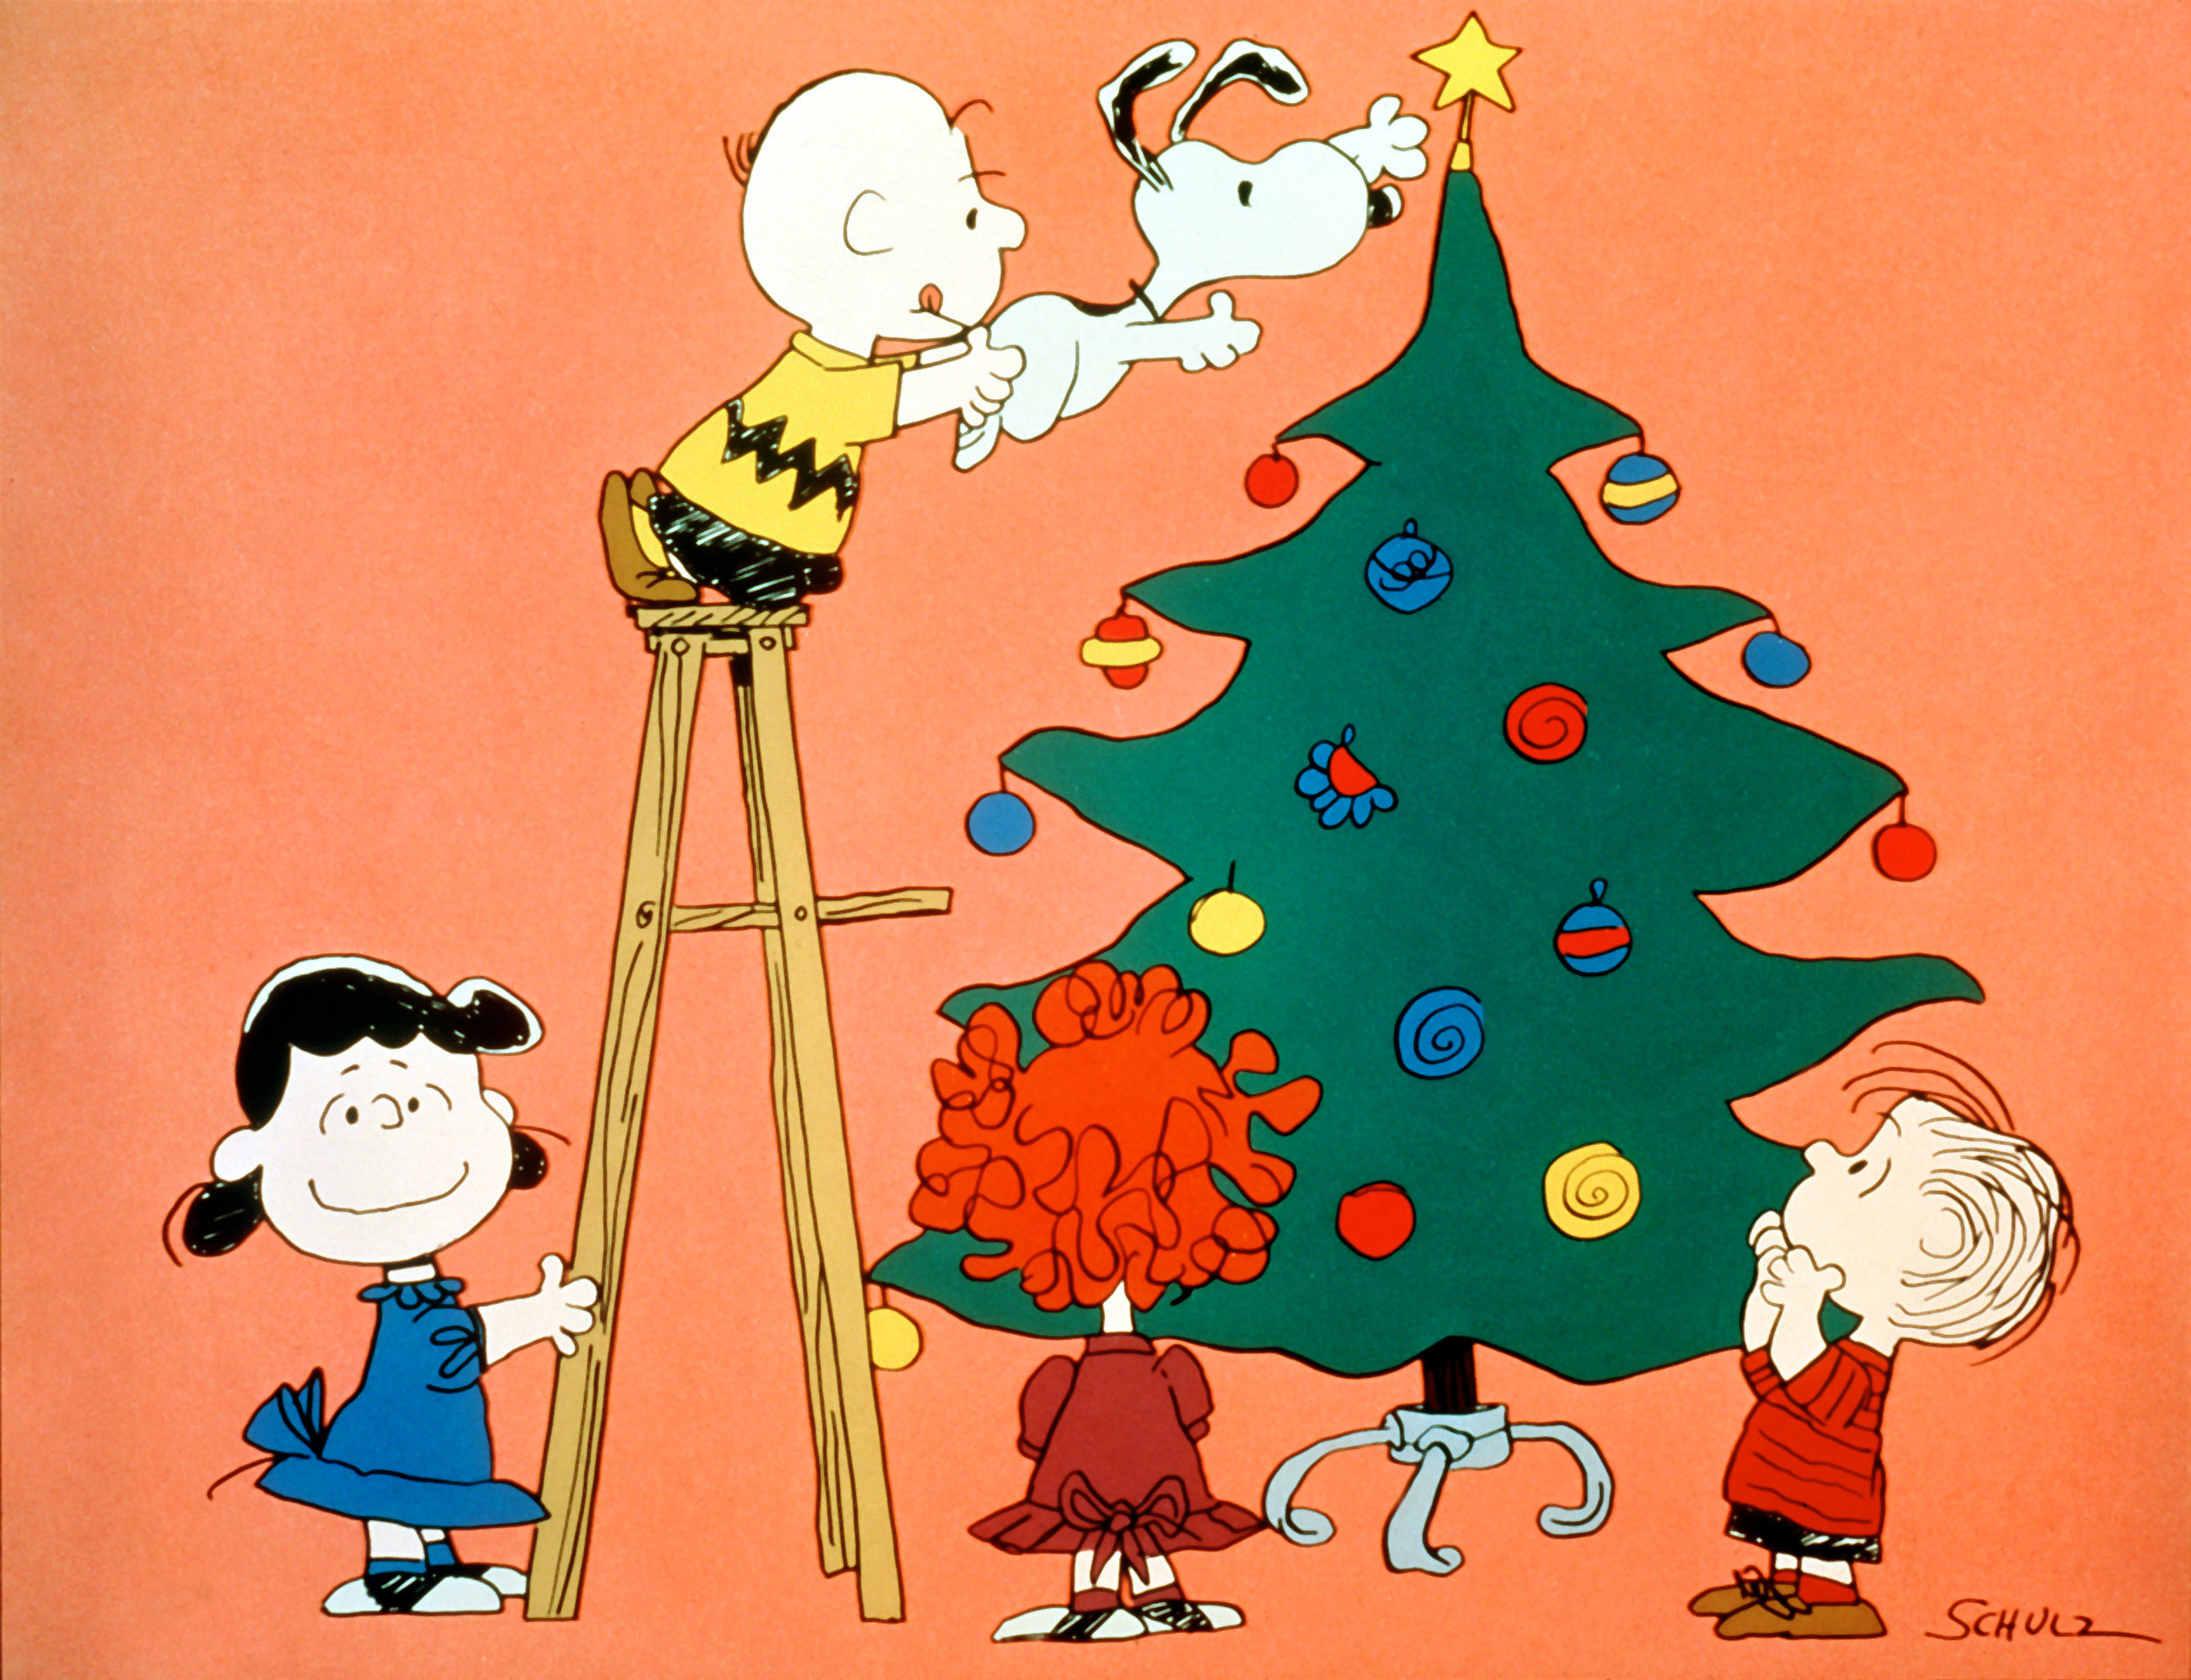 Snoopy putting a star on a Christmas tree with other friends helping